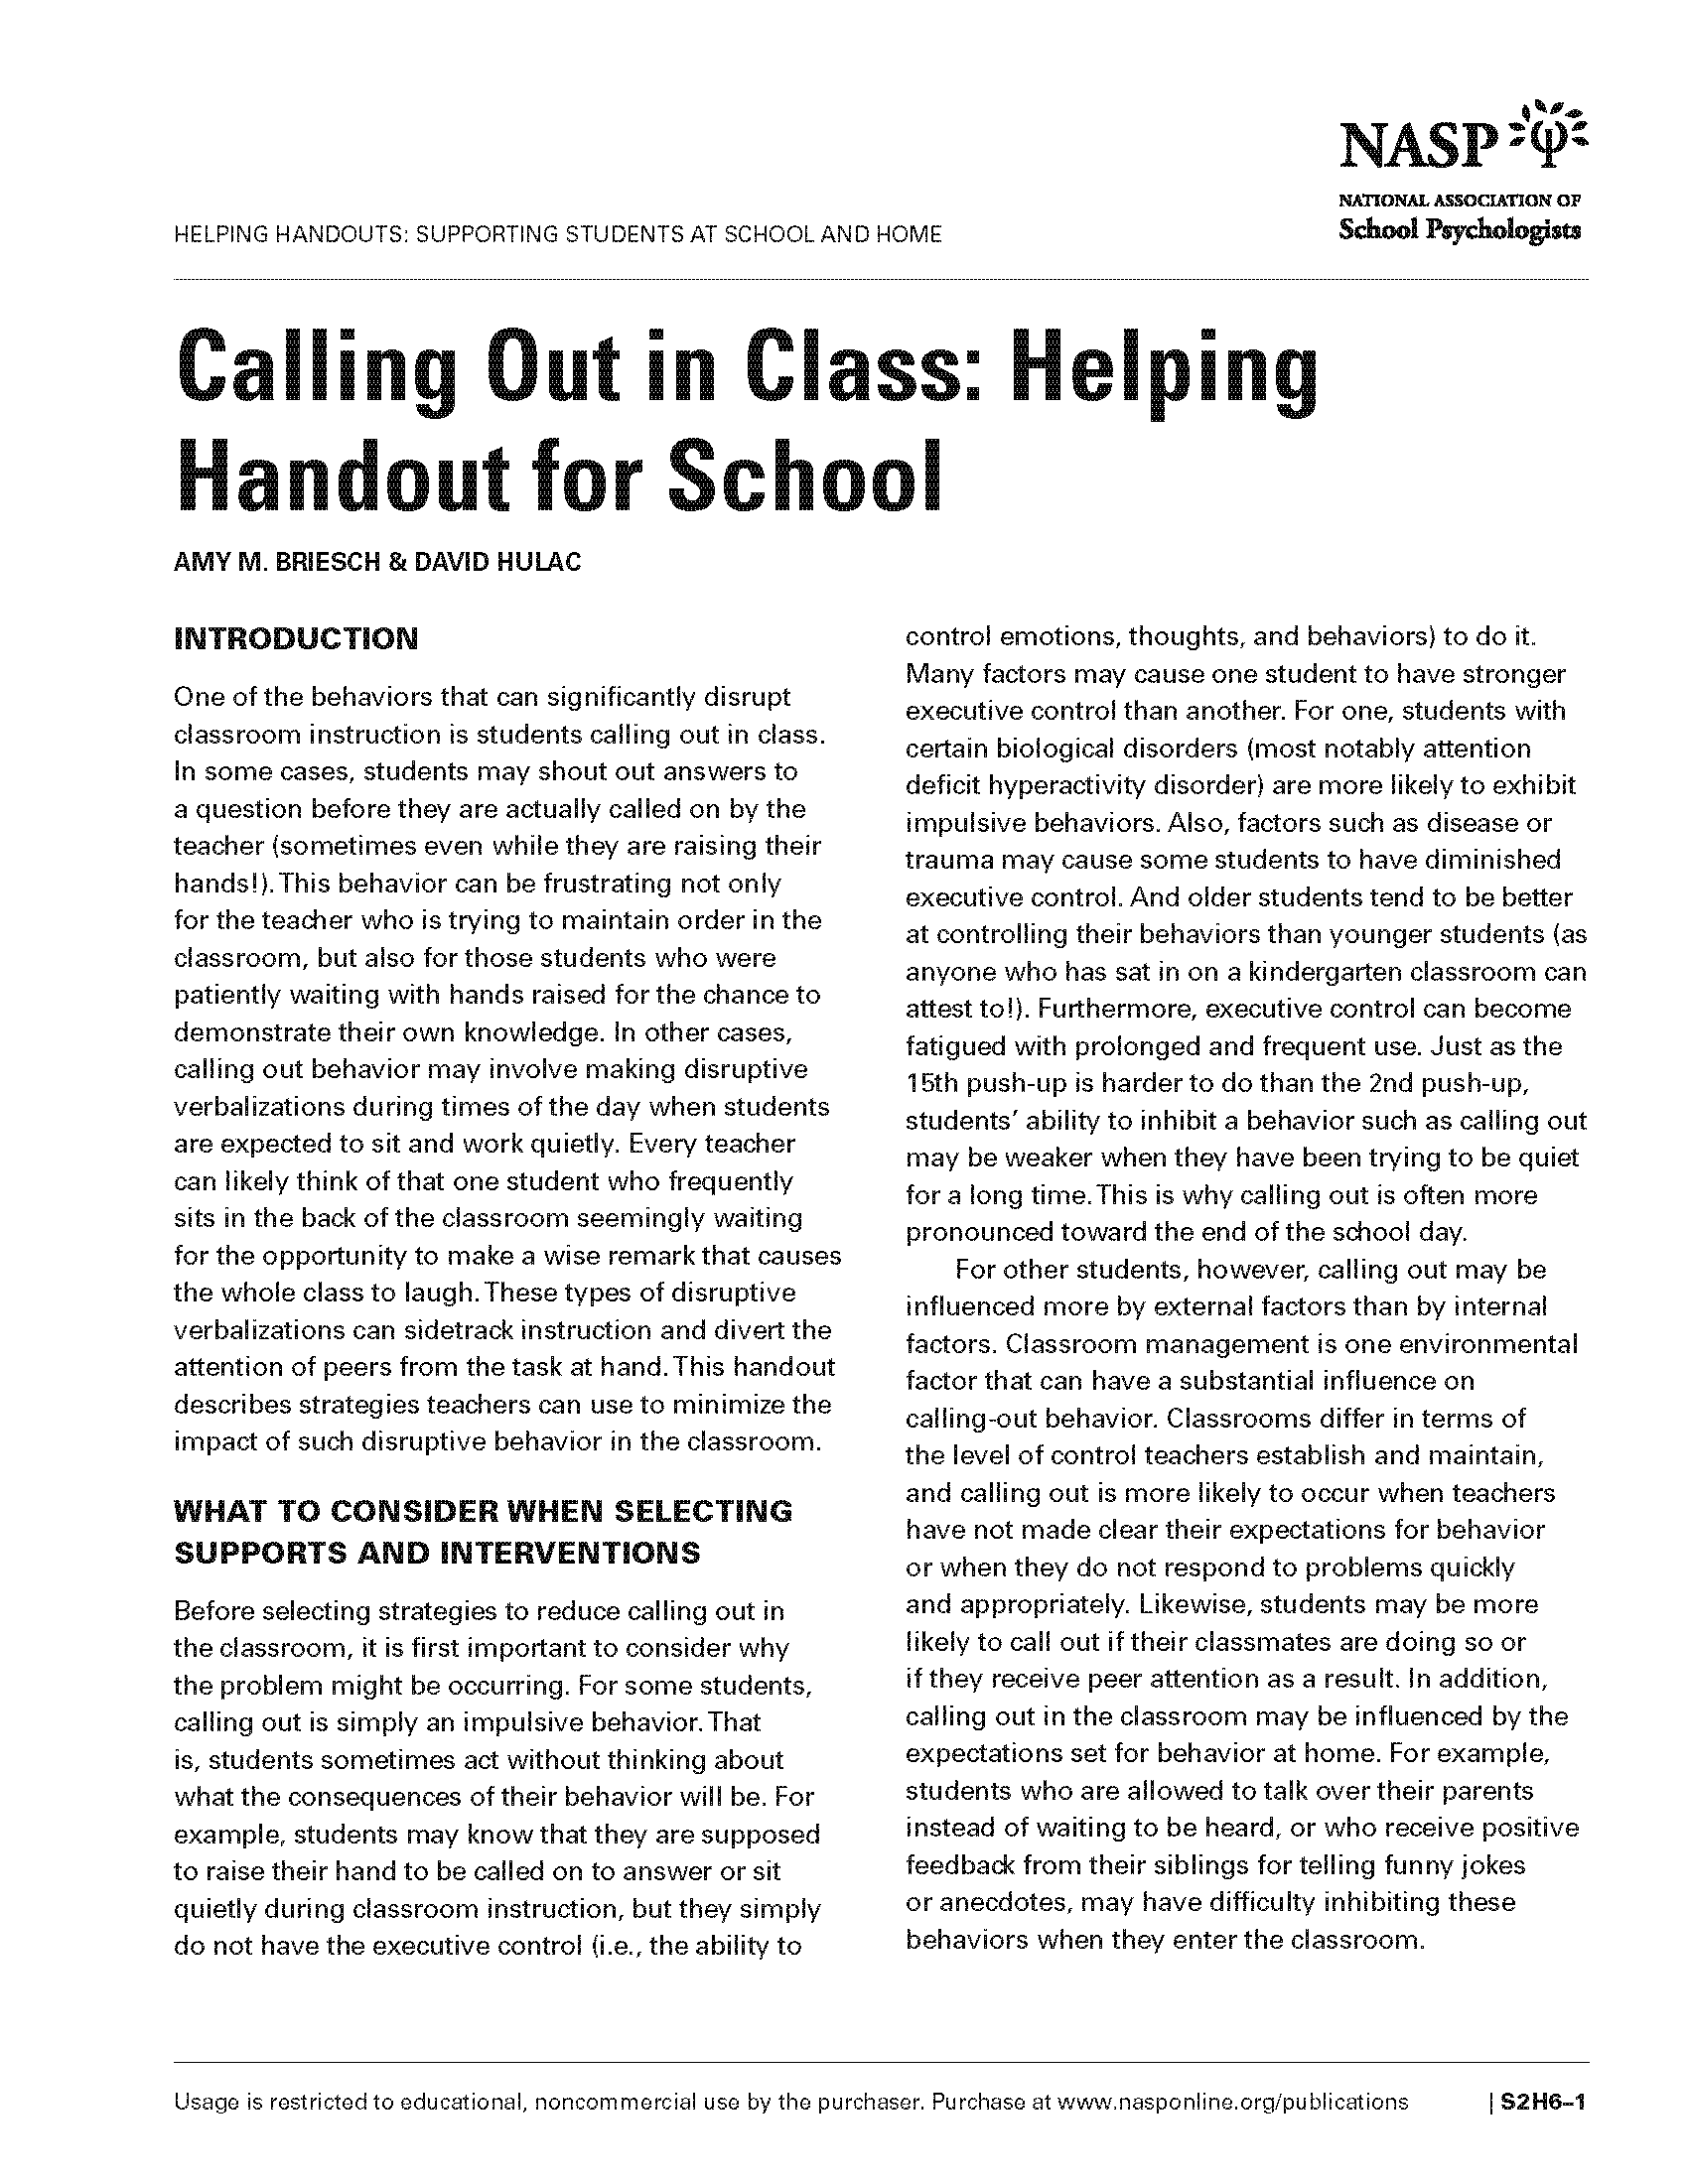 Calling Out in Class: Helping Handout for School